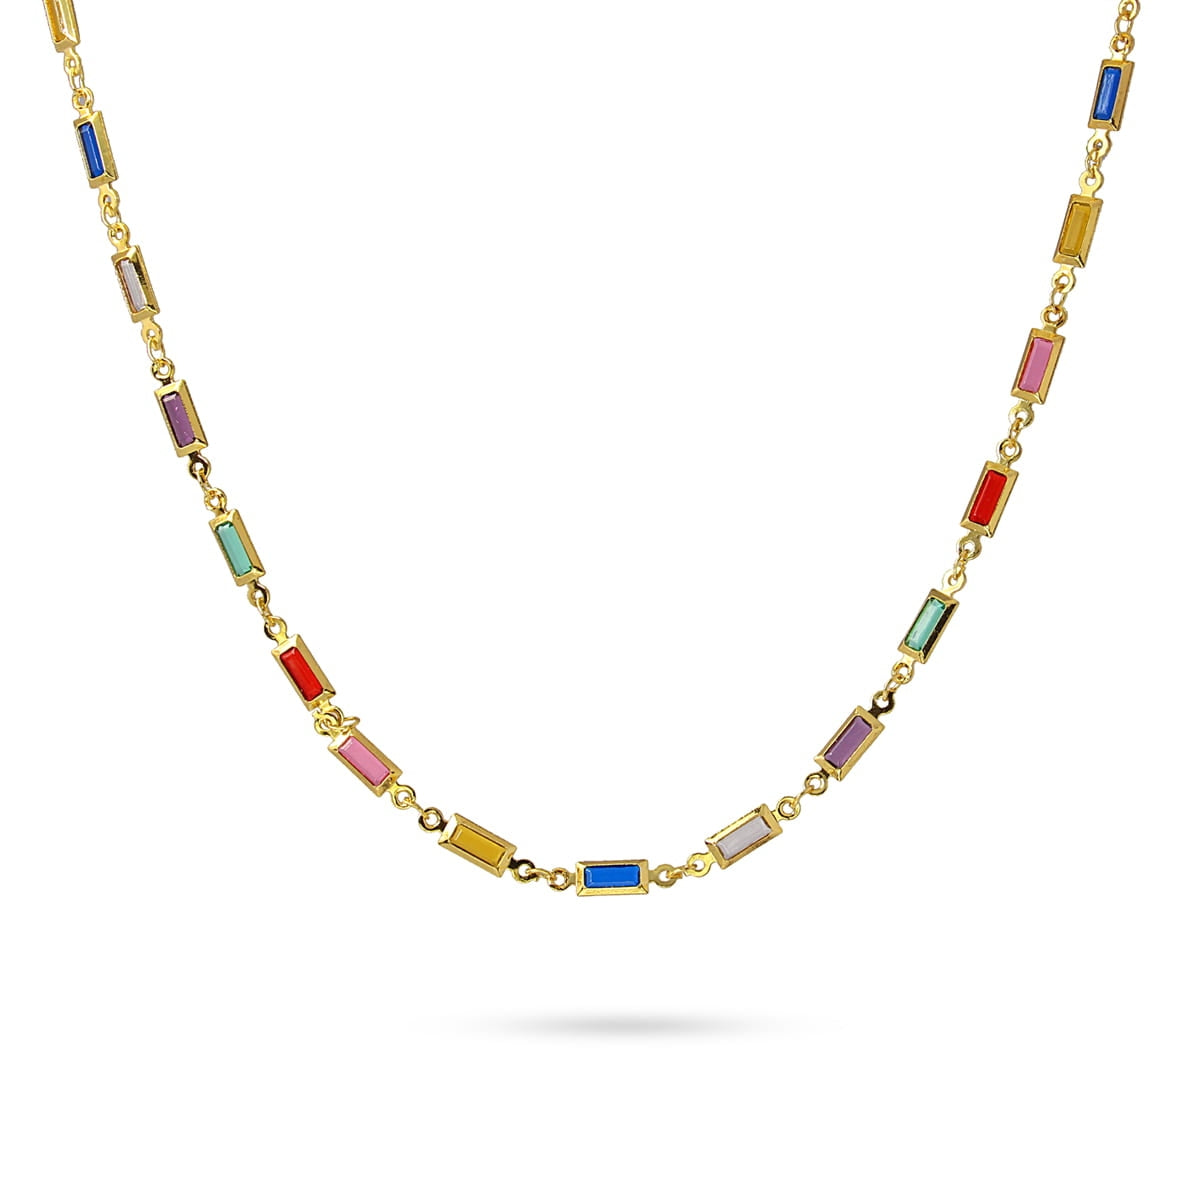 Talaier Necklace